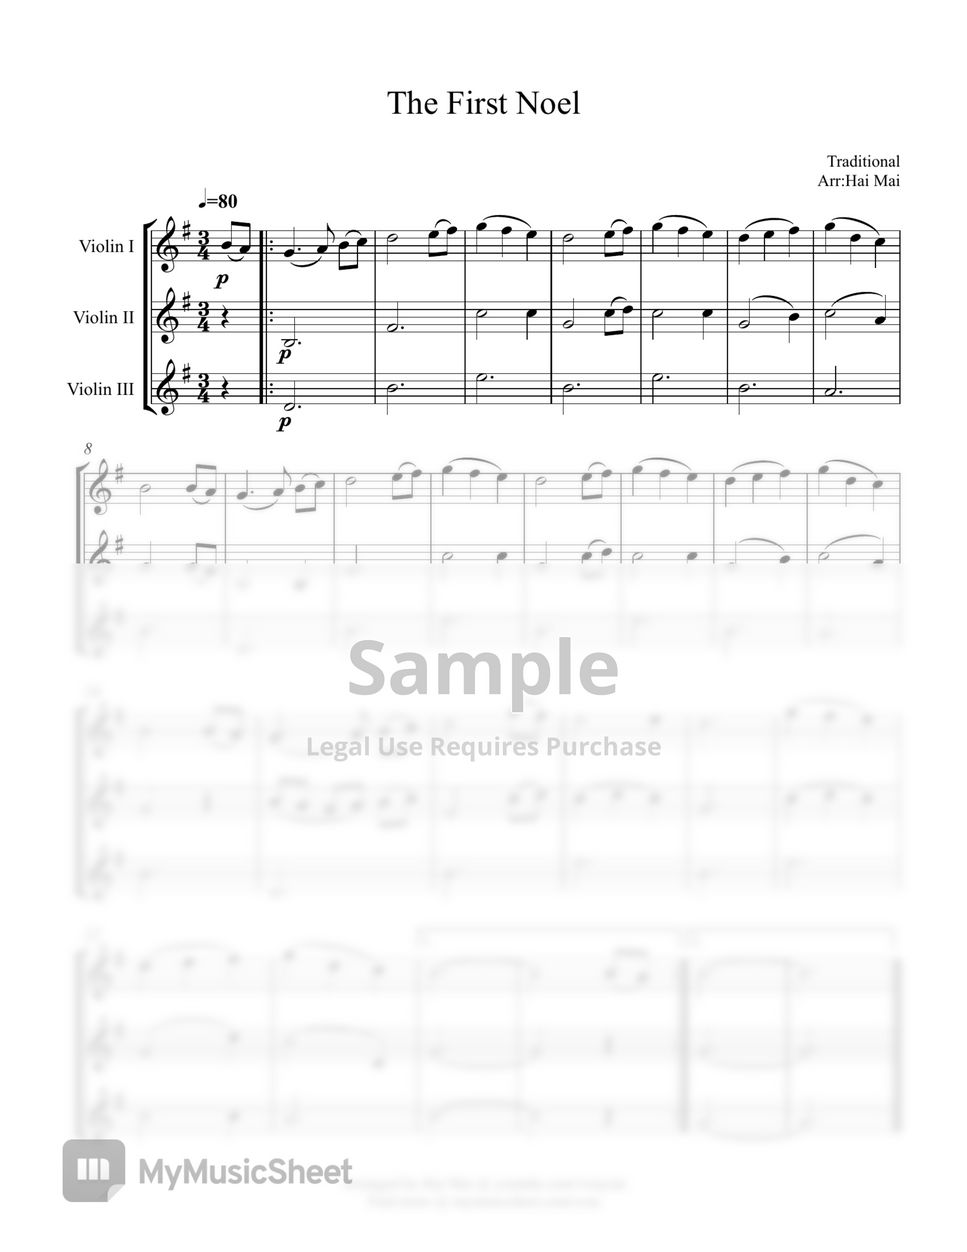 Traditional - The First Noel - For 3 parts Violin Ensemble by Hai Mai